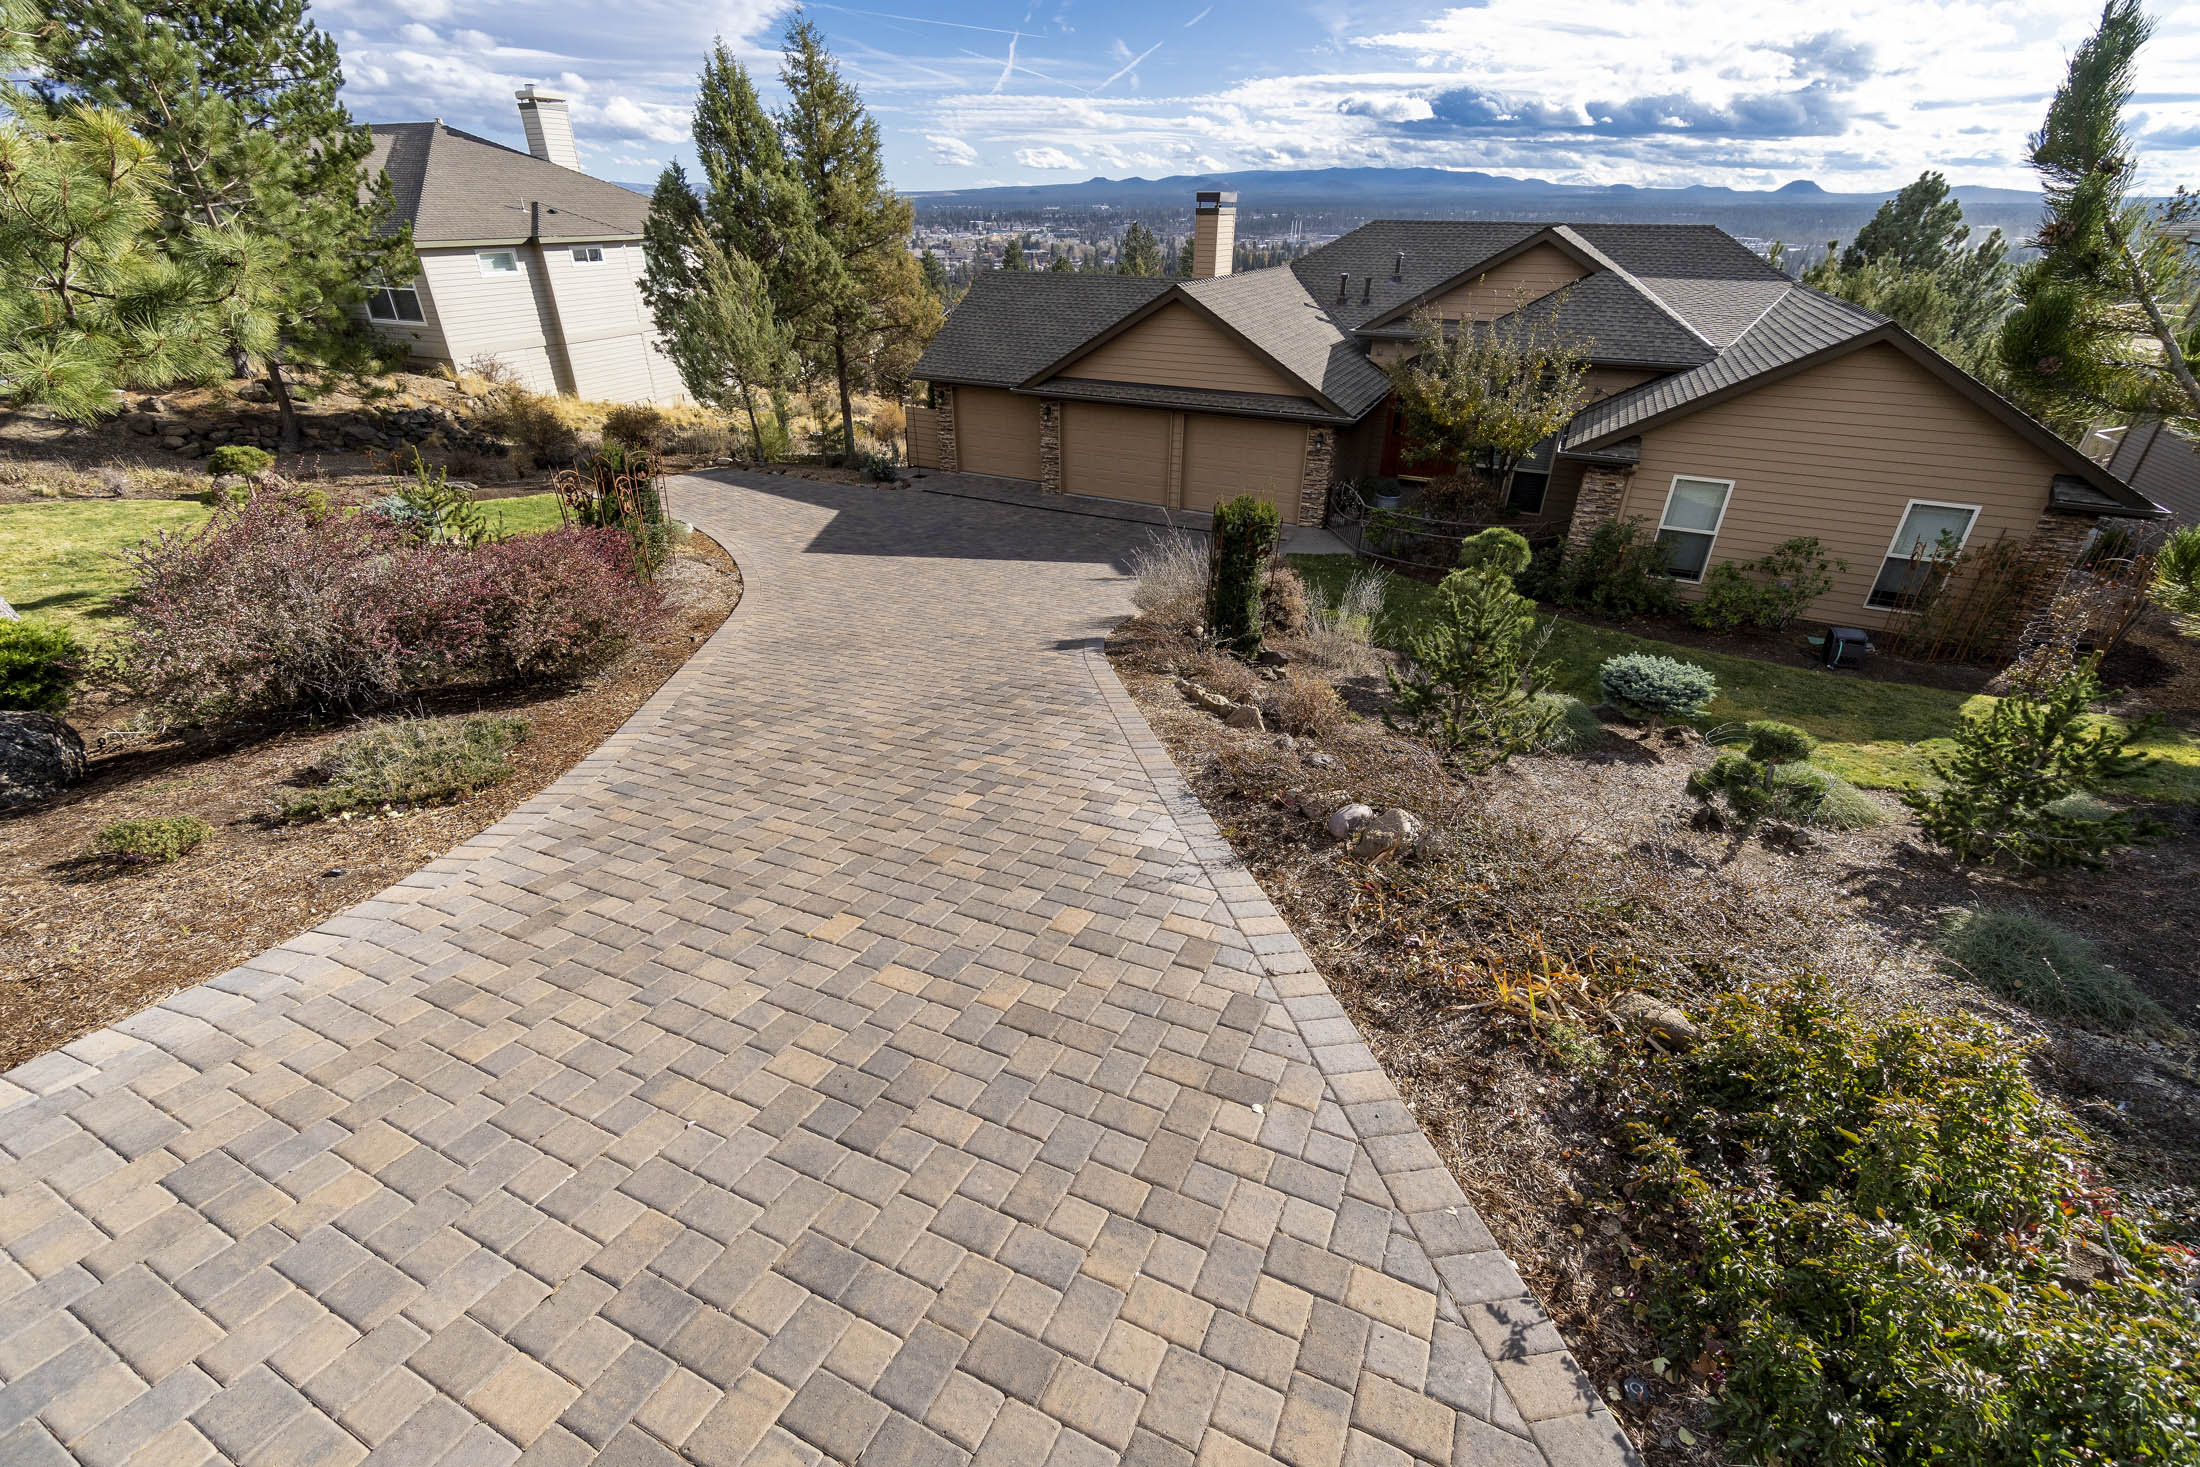 Paved driveway in front of a home.